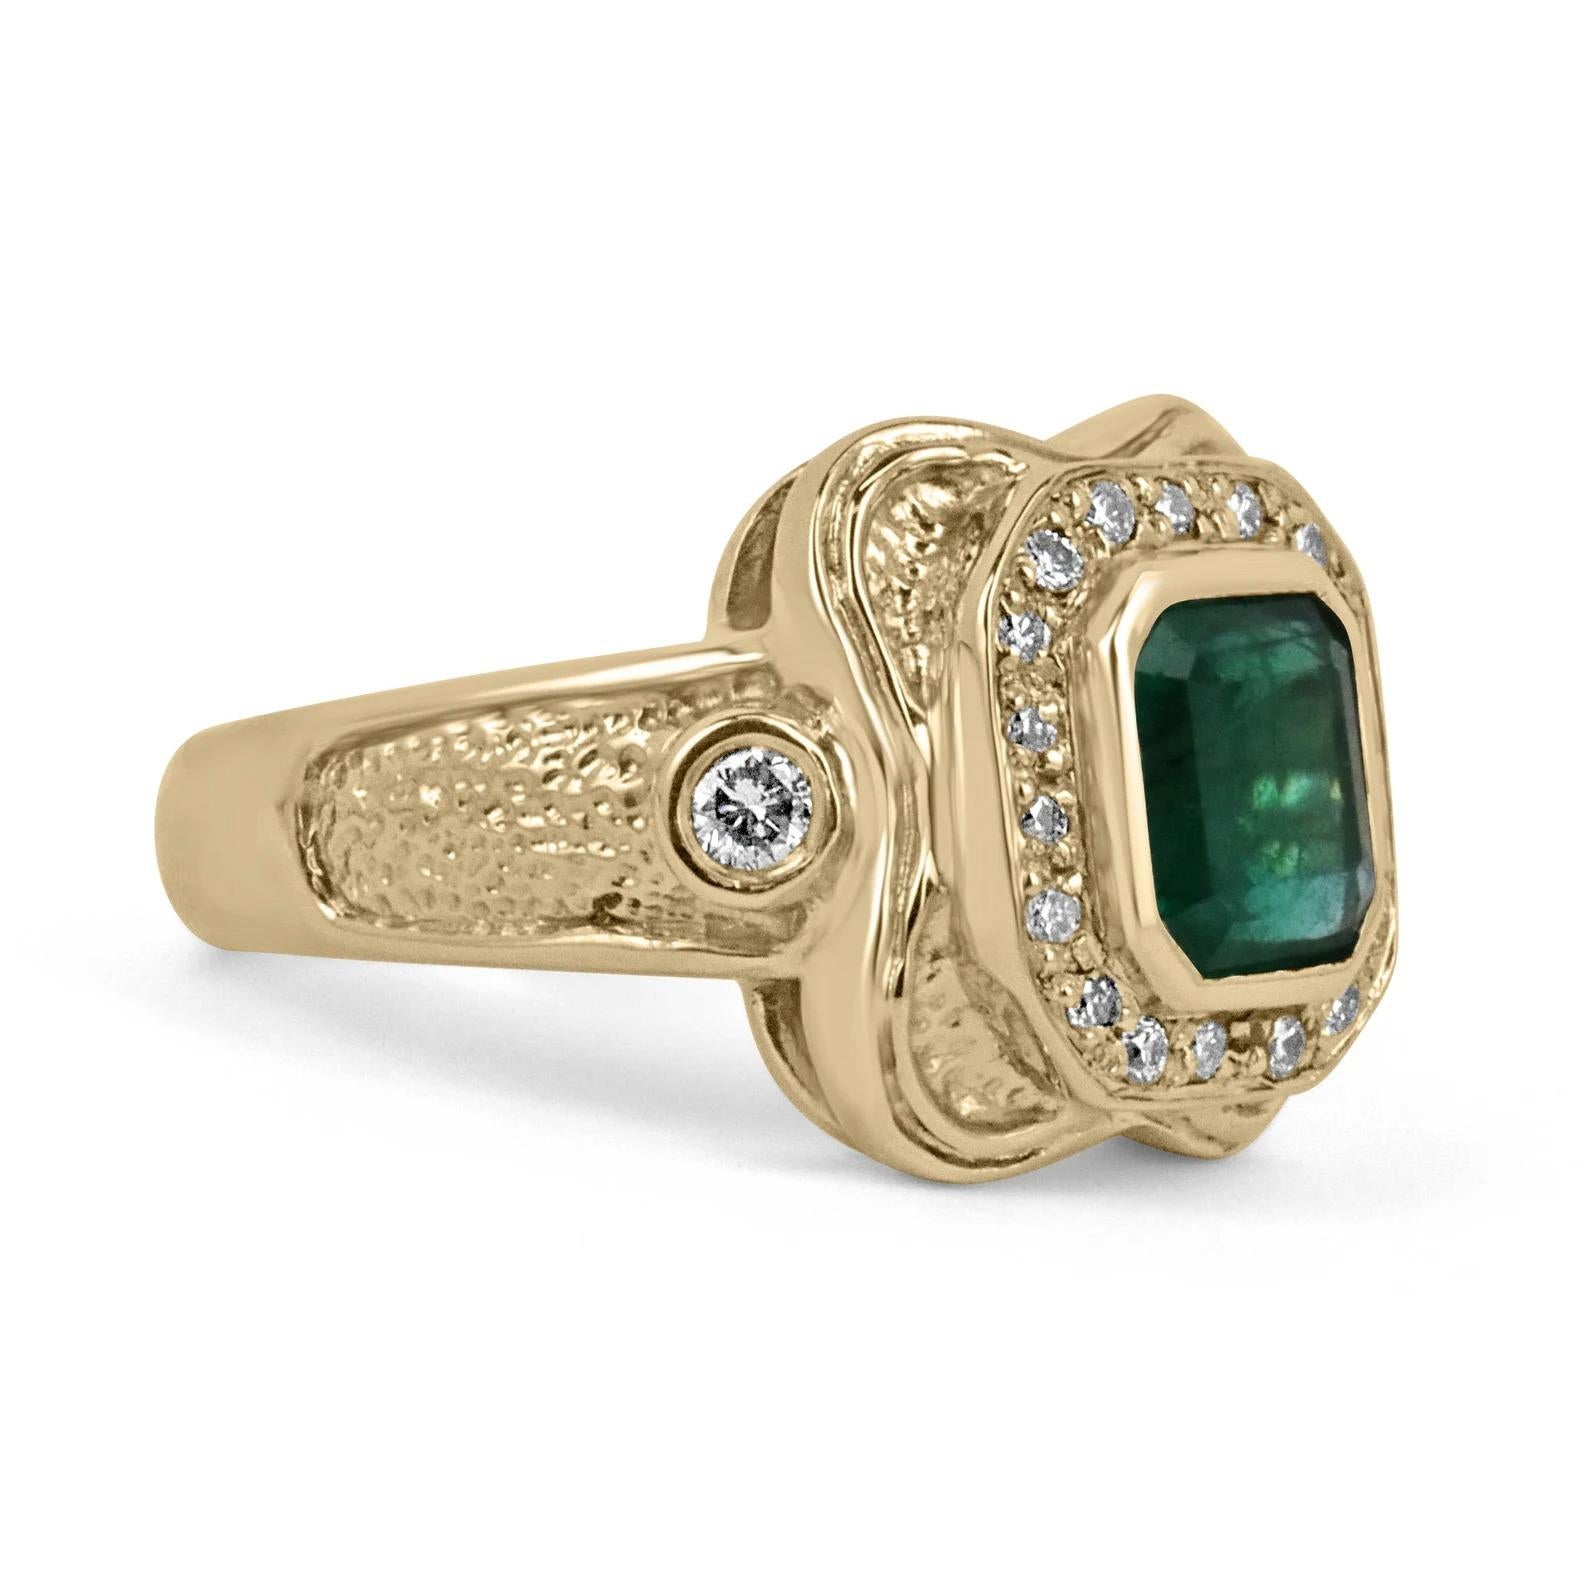 A magnificent emerald and diamond statement ring. This remarkable piece features a 1.89-carat, natural emerald cut emerald from the origins of Zambia. The center gem displays a ravishing and desirable intense dark emerald green color with very good